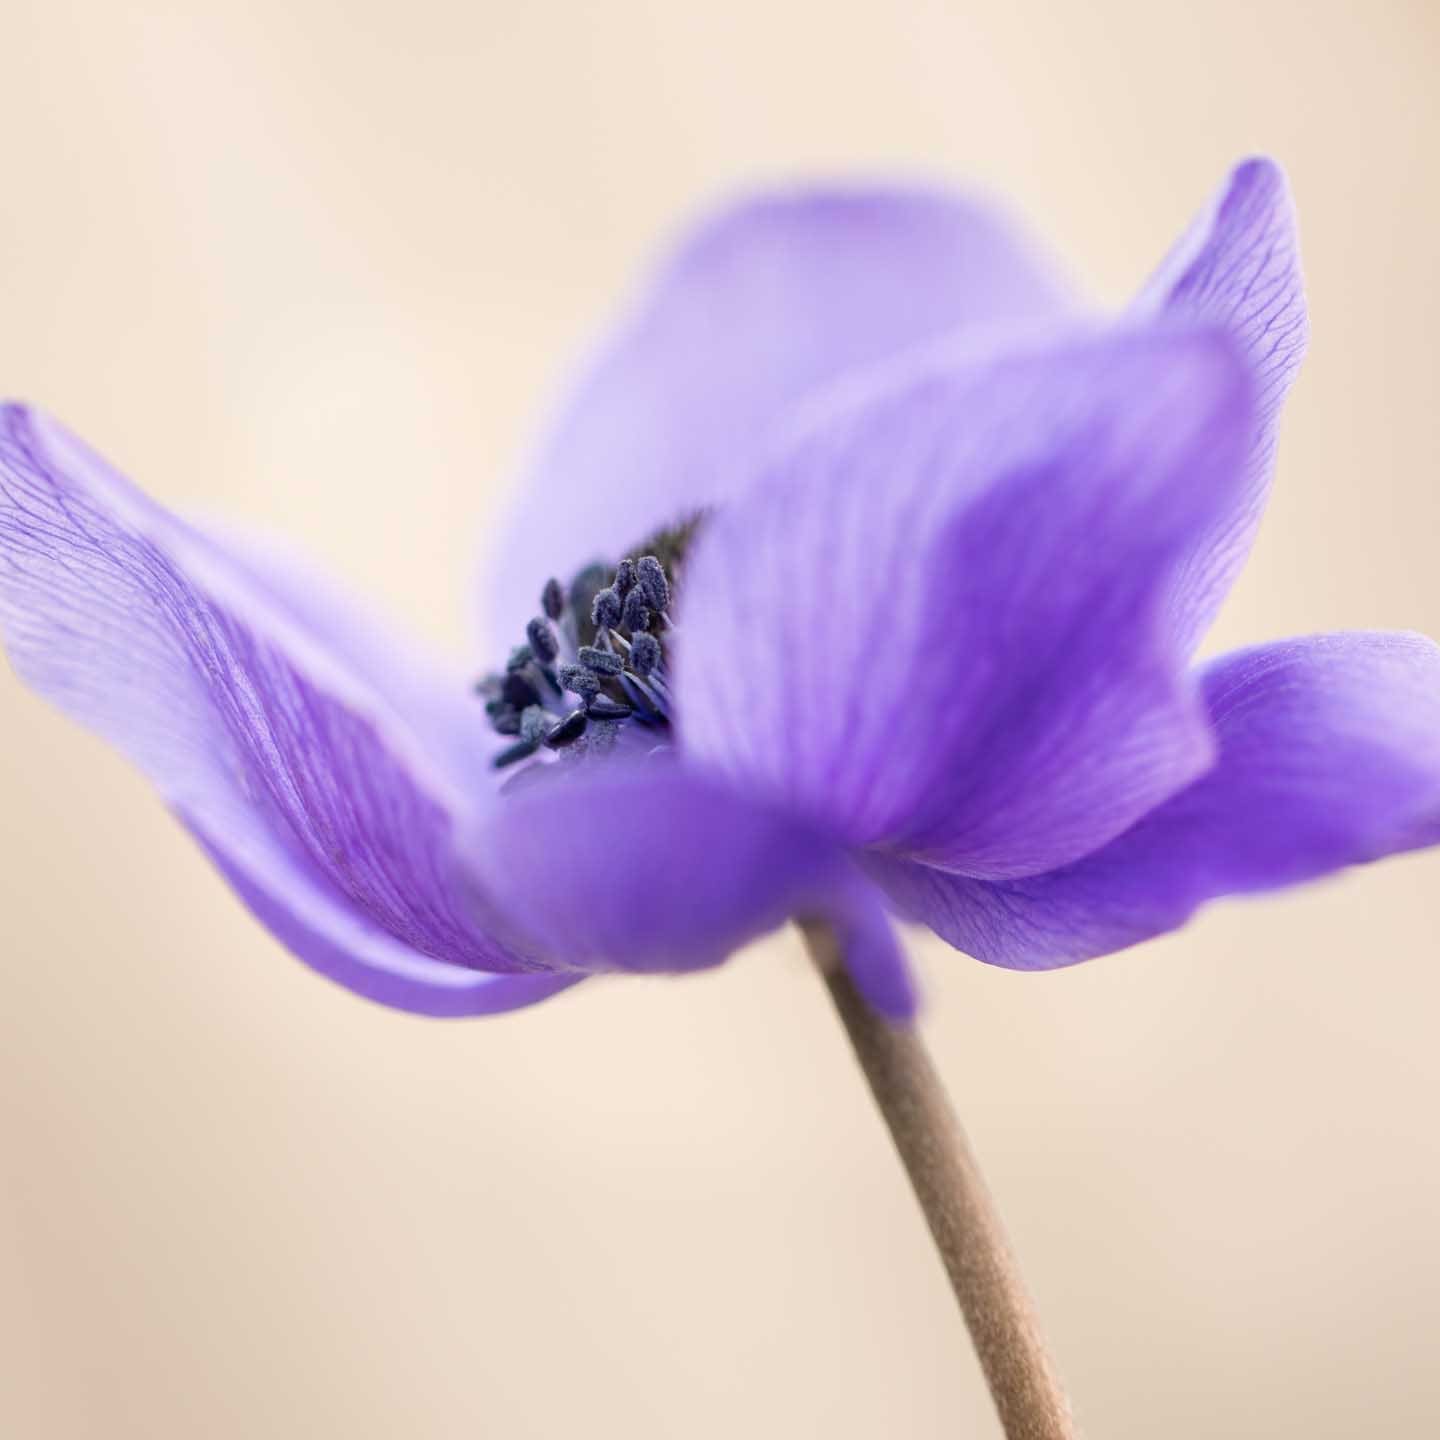 CJPOTY round 3 (March 2023) shortlisted image - anemone